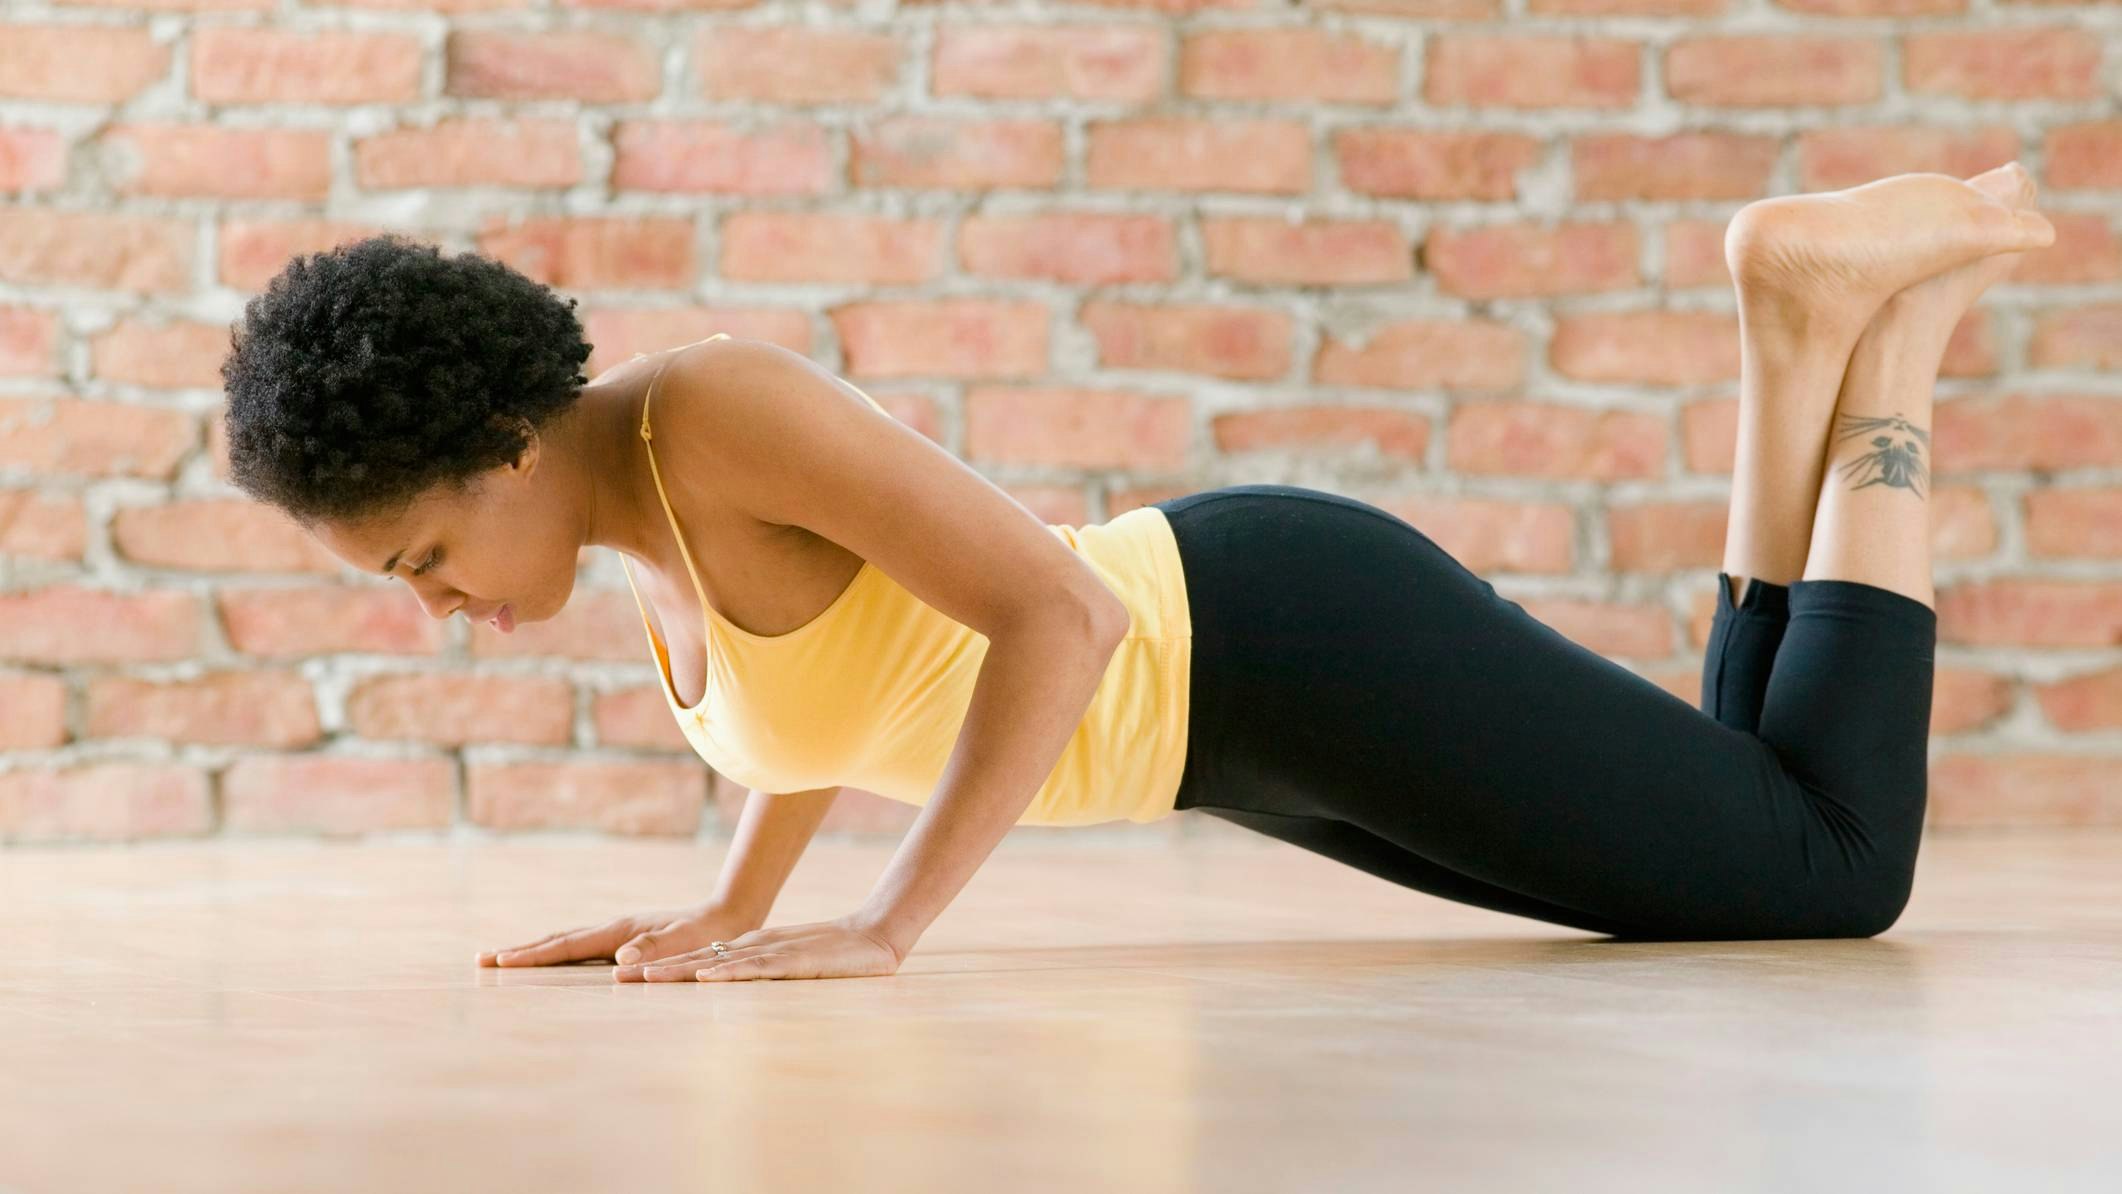 Woman performing a knee-down push-up